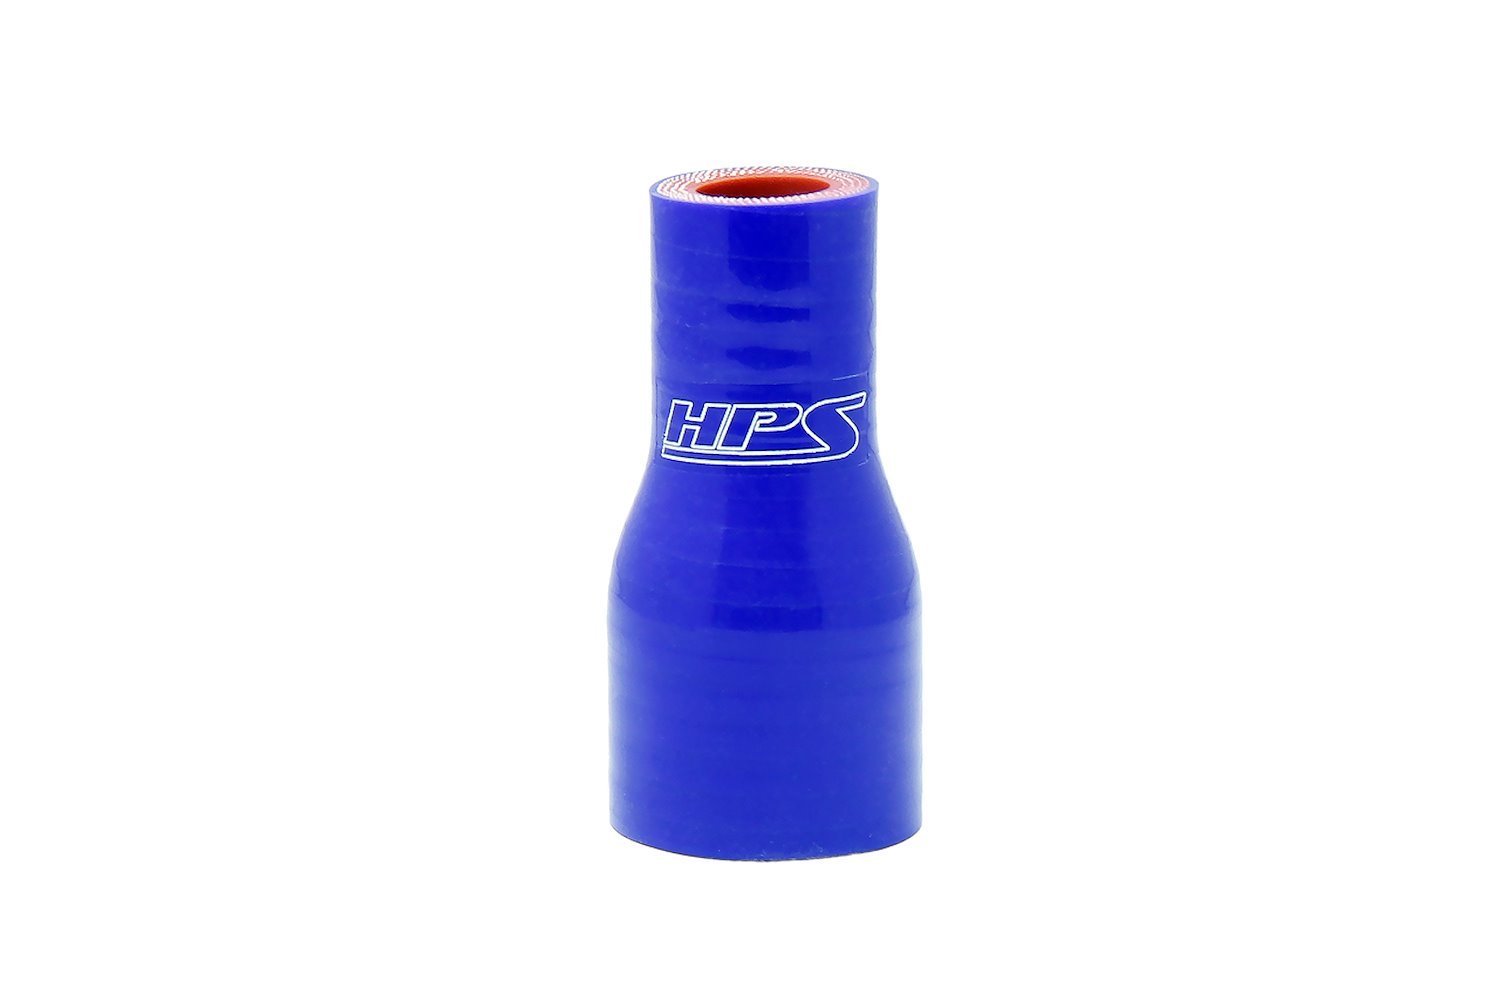 HTSR-038-050-L4-BLUE Silicone Reducer Hose, High-Temp 4-Ply Reinforced, 3/8 in. - 1/2 in. ID, 4 in. Long, Blue